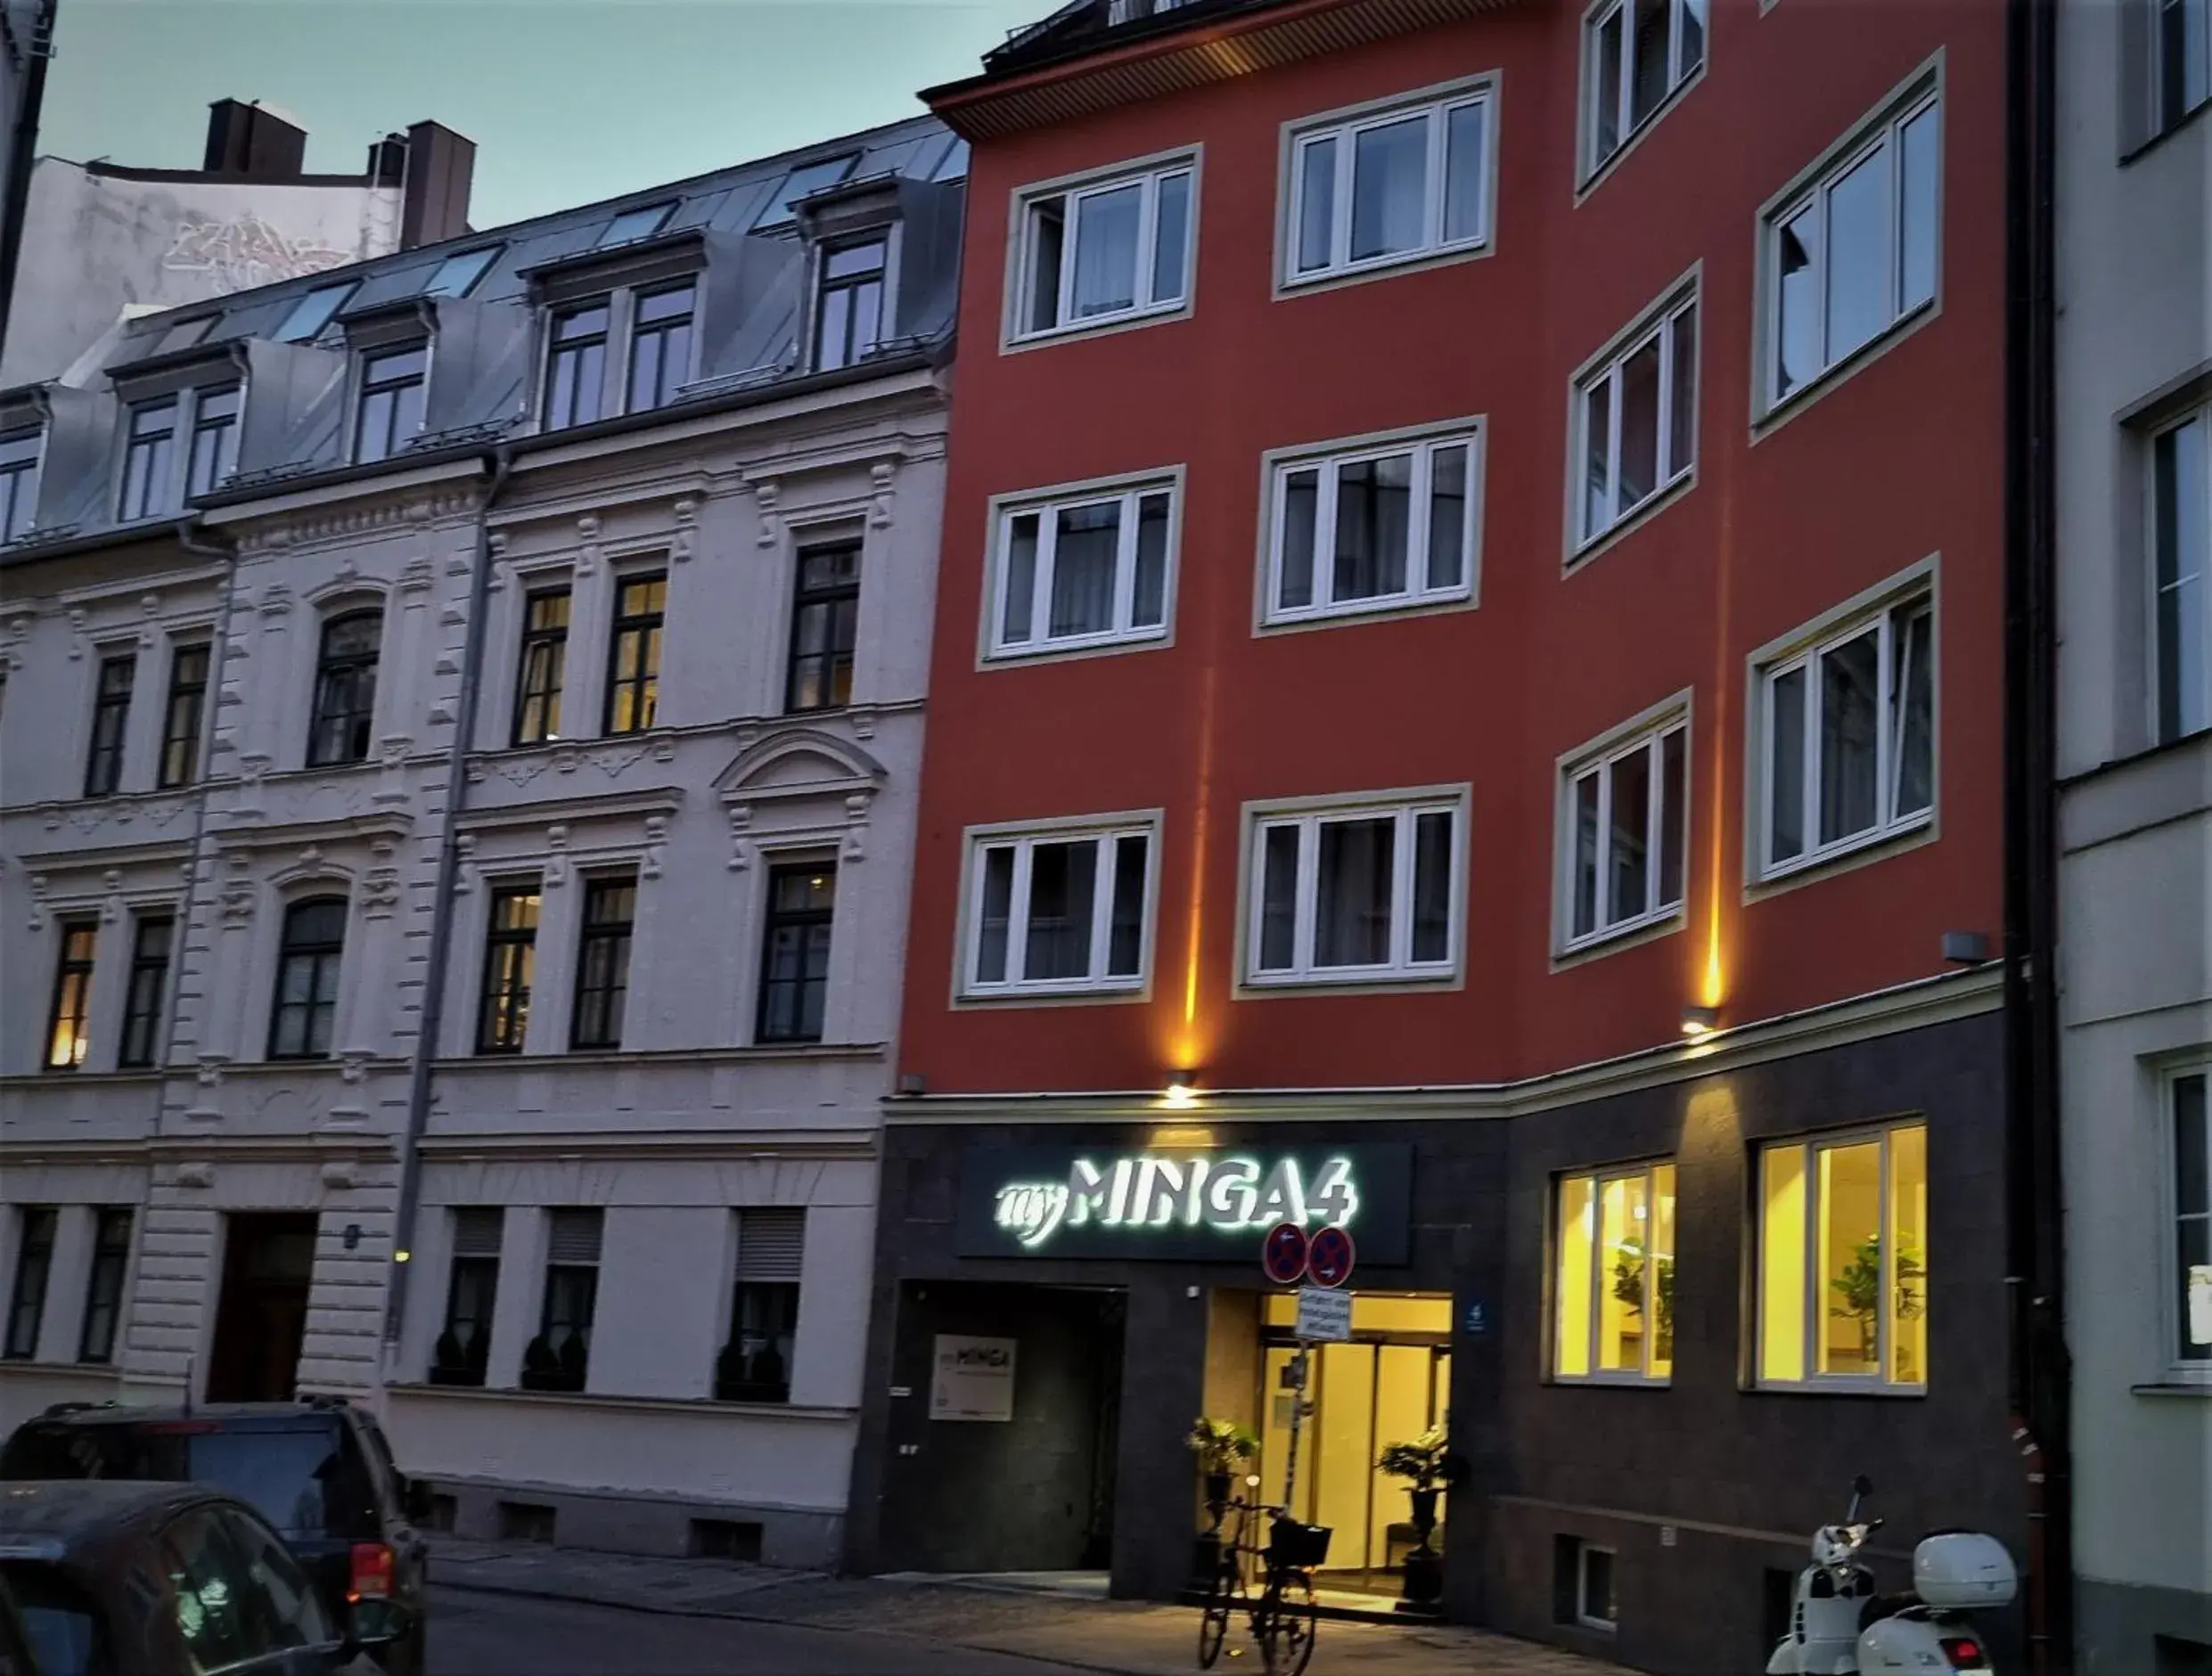 Property Building in myMINGA13 - Hotel & serviced Apartments